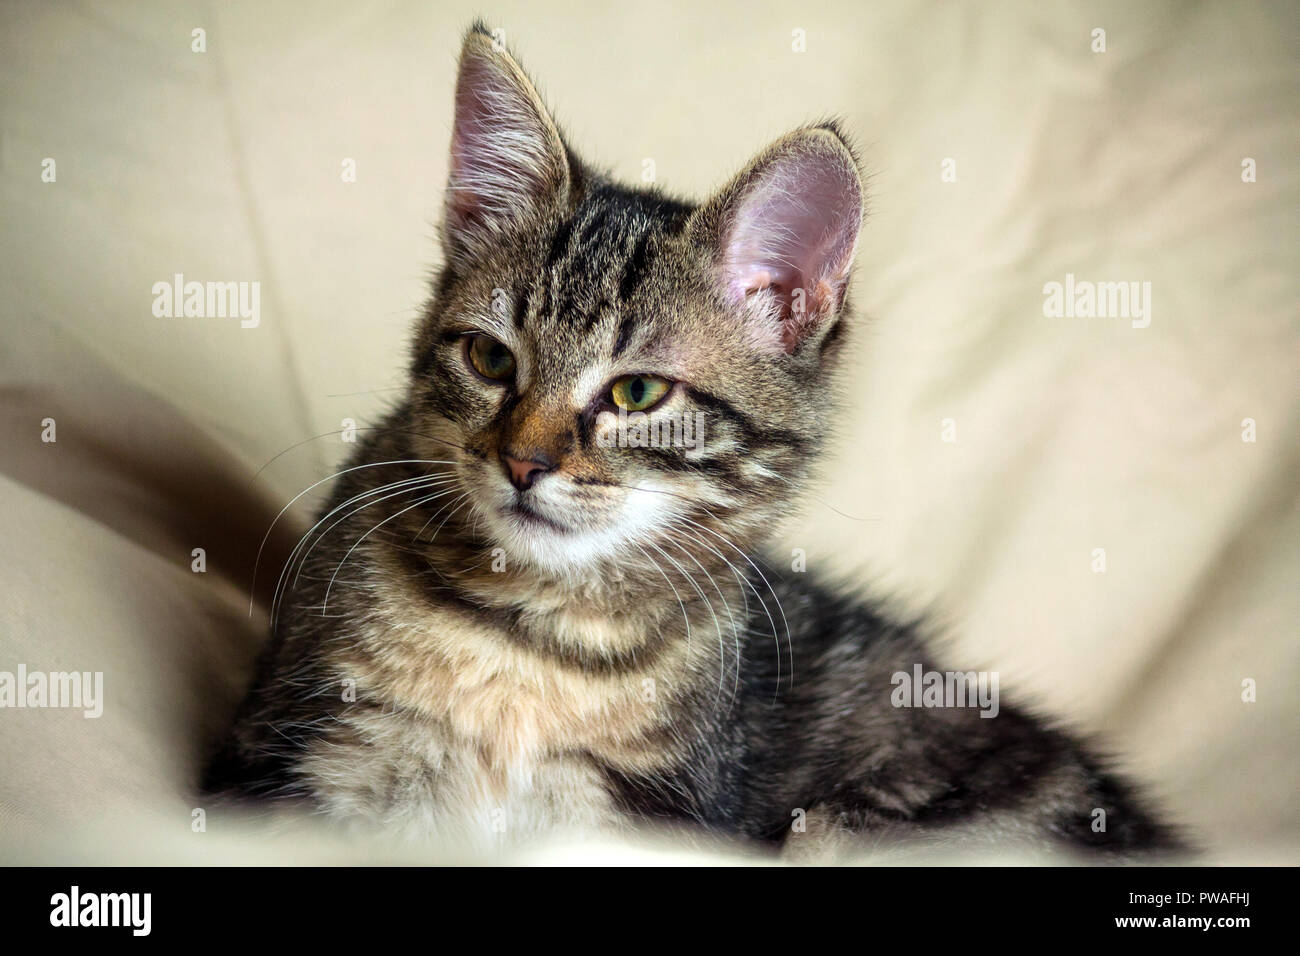 unbred tabby kitten lying on a yellowish material, looking carefully to the side, in the background is a light similar material yellow shade, Stock Photo